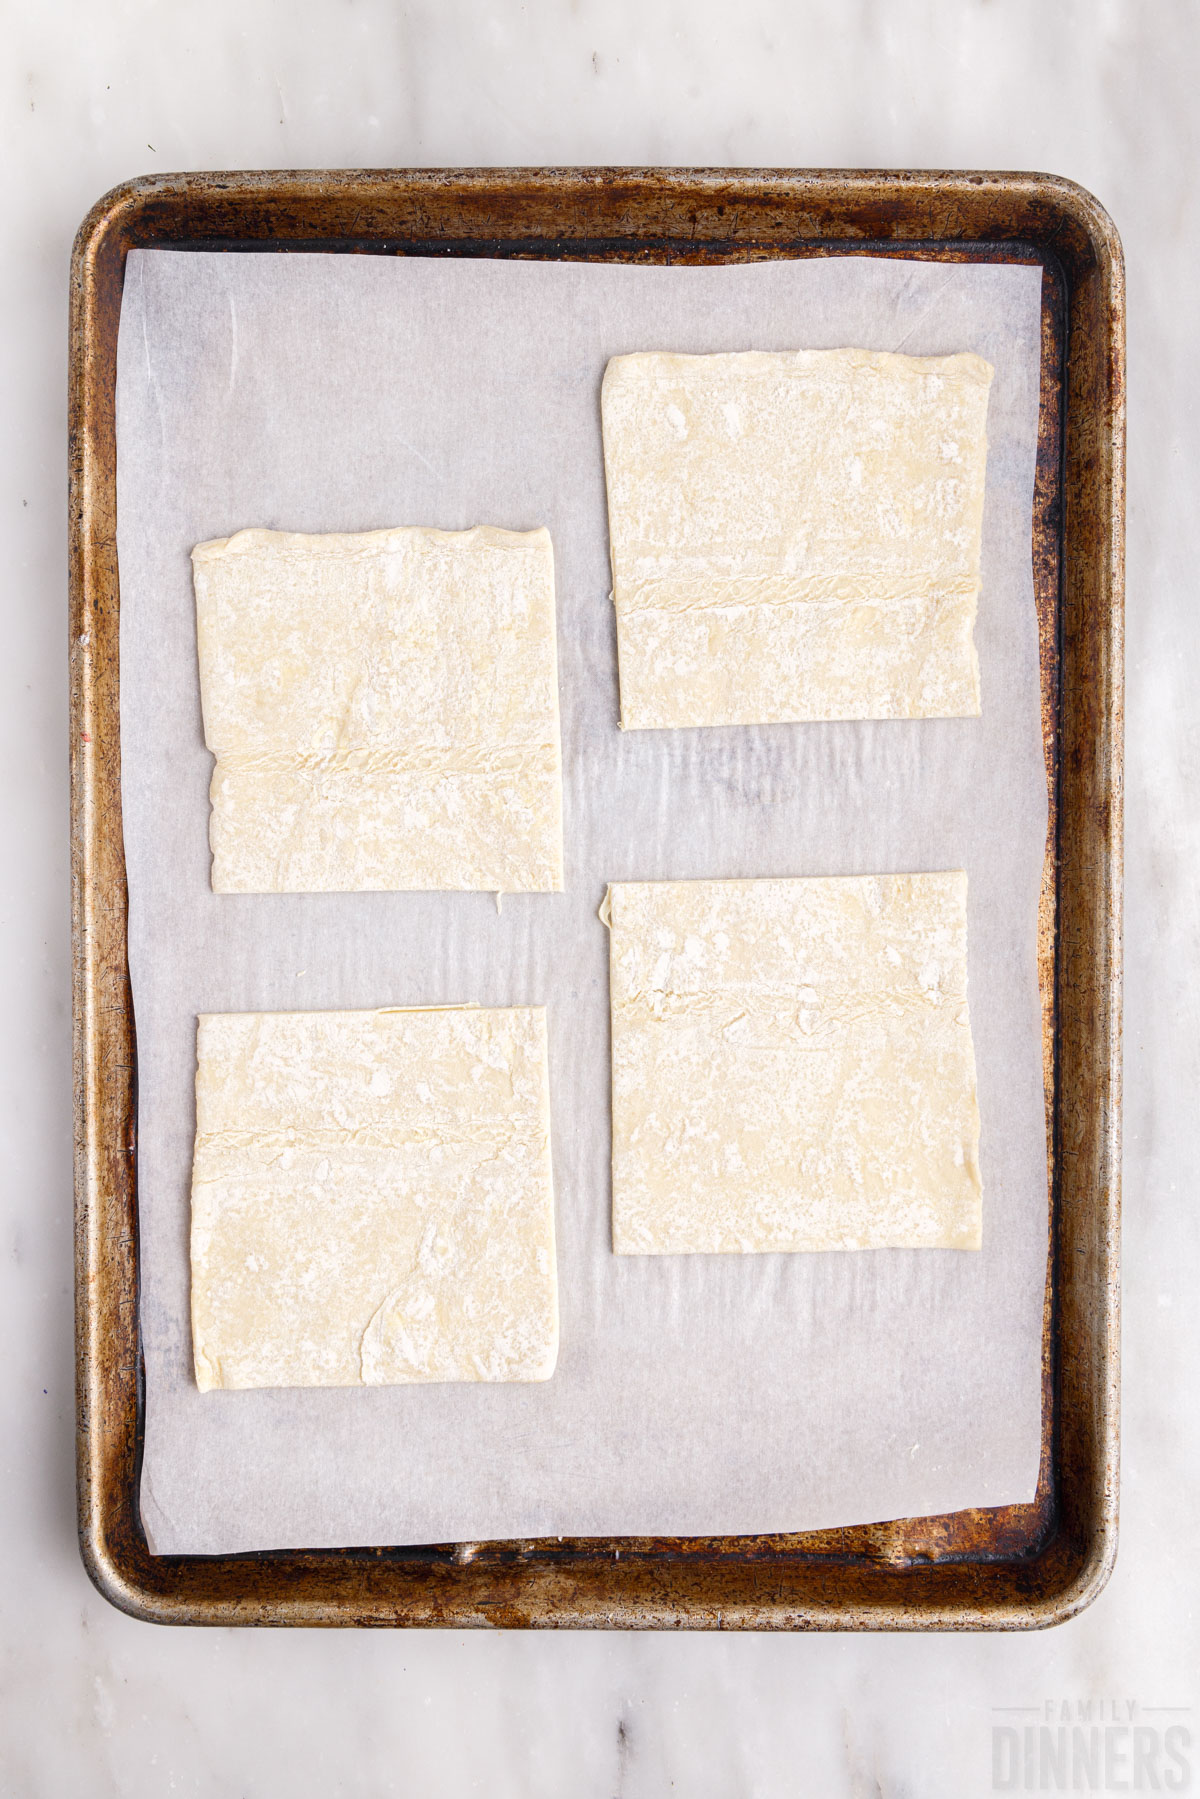 four puff pastry squares on a baking sheet